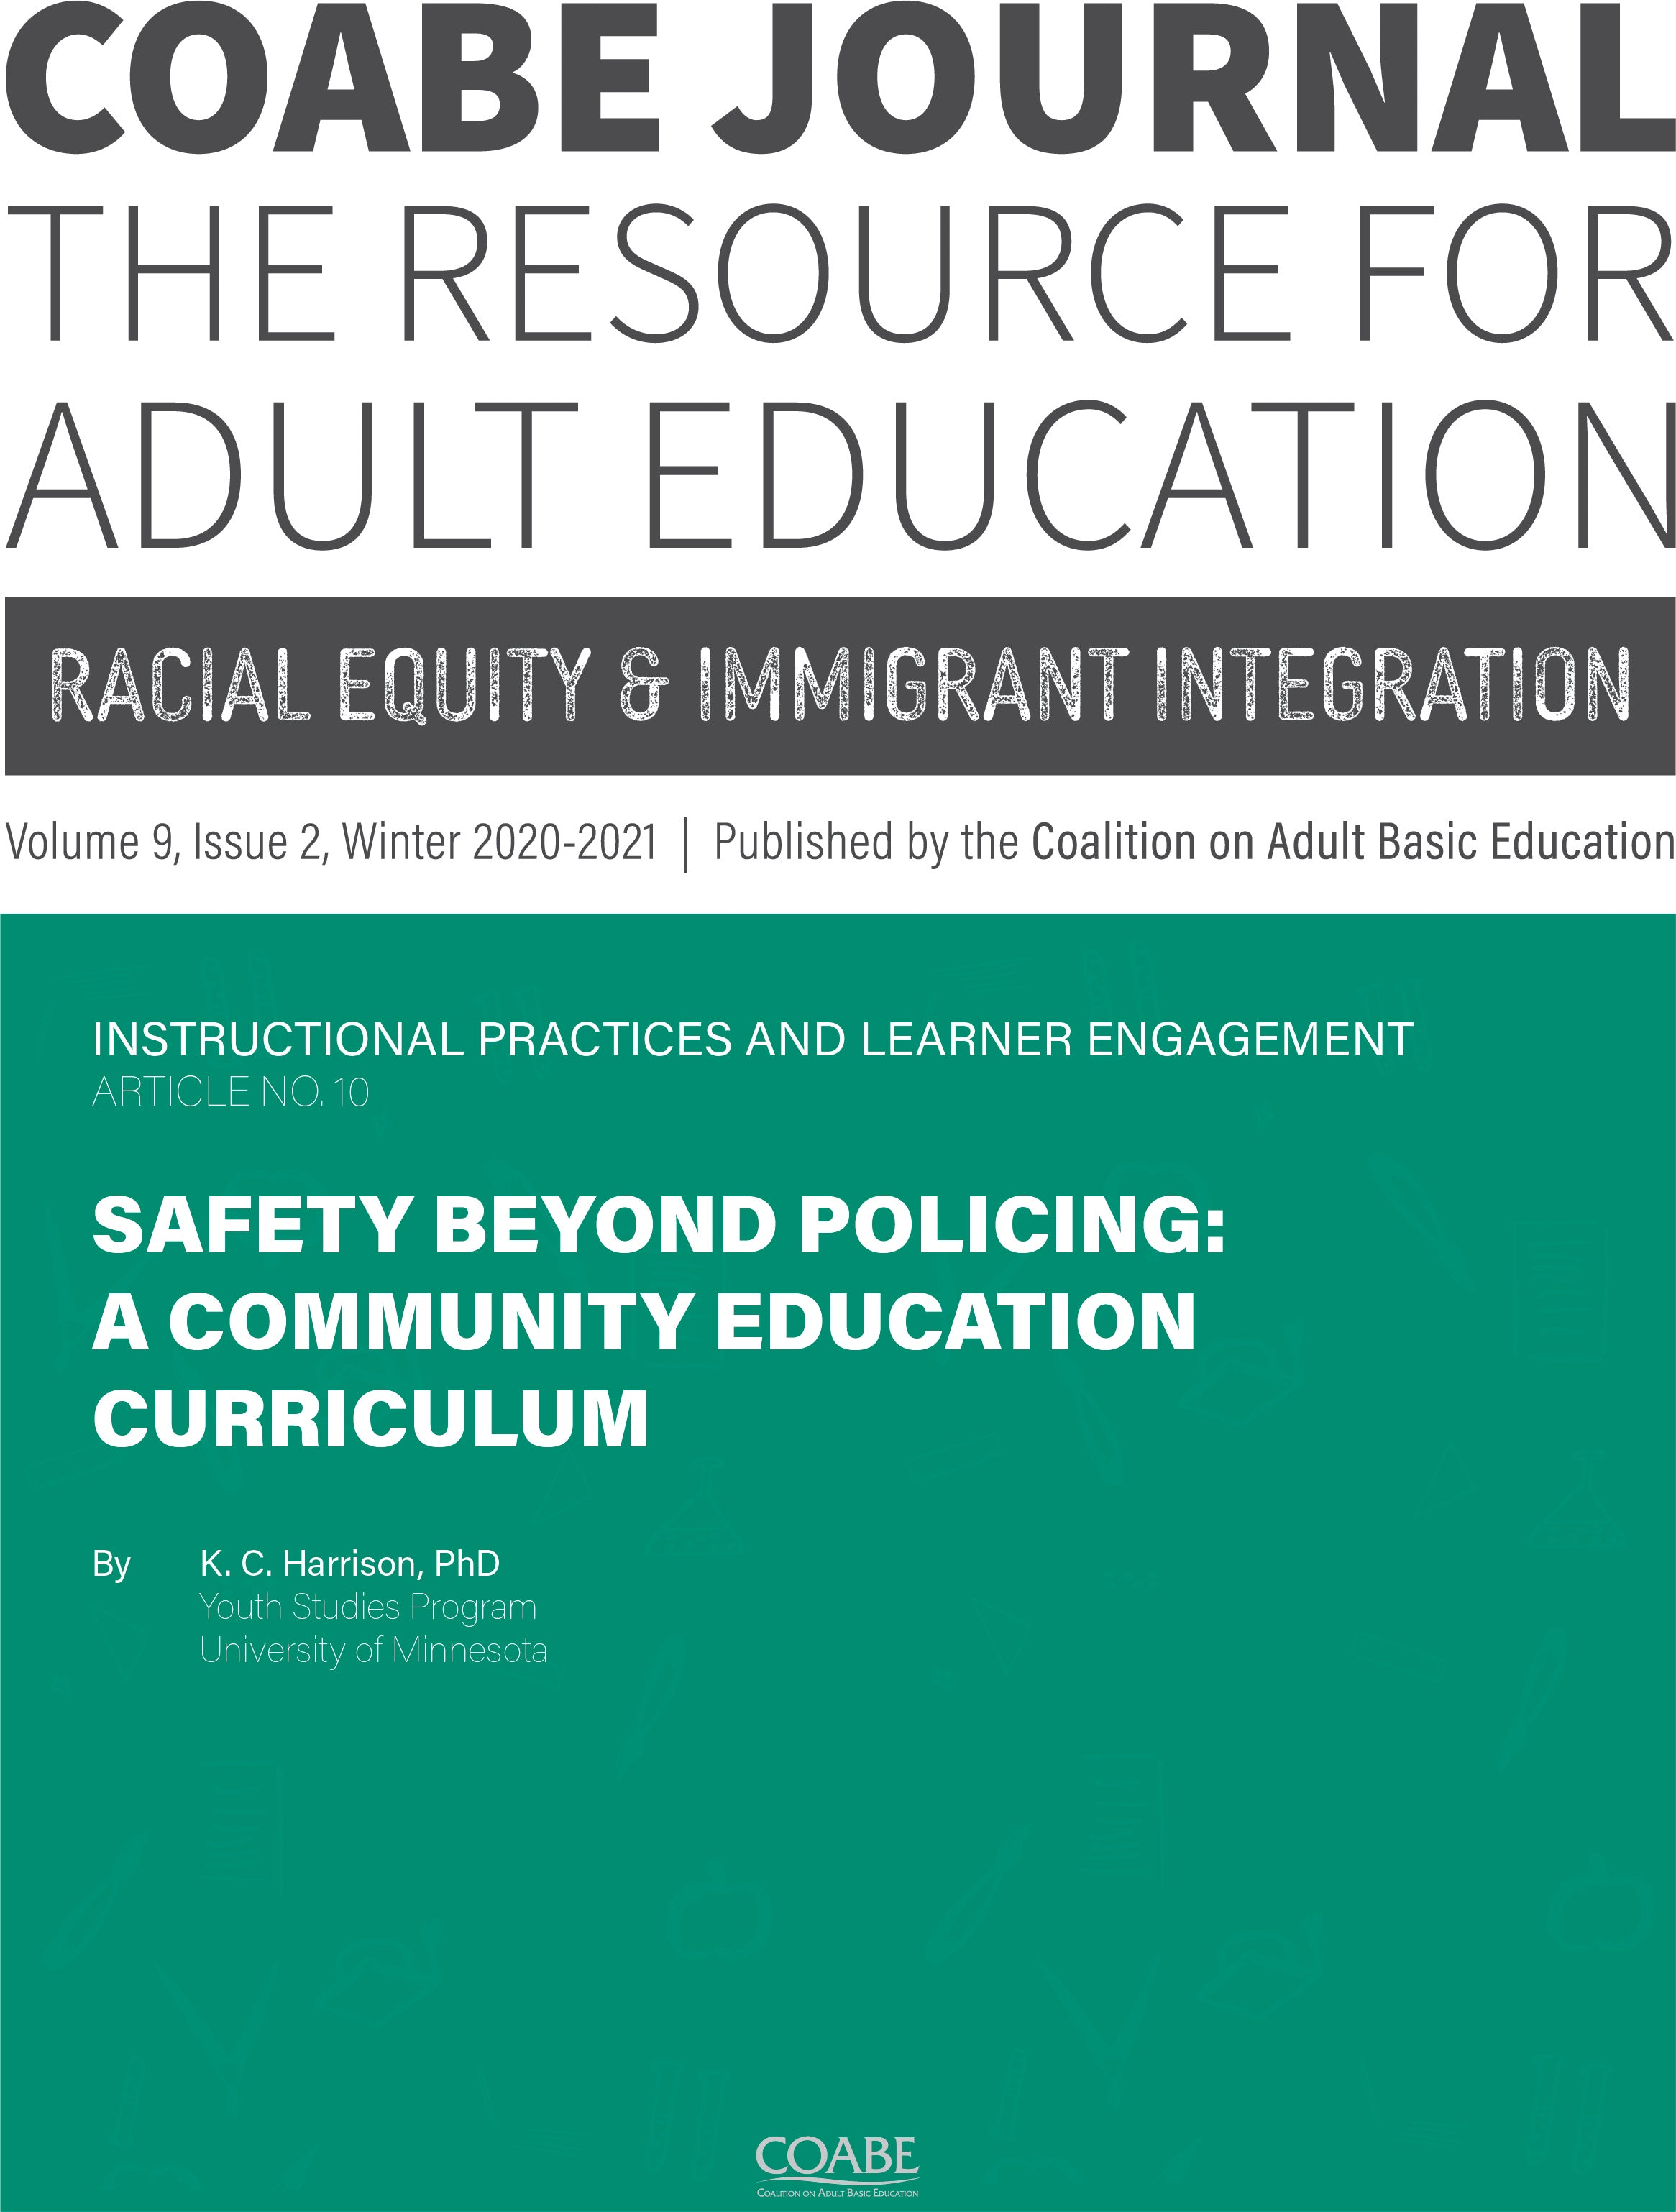 Article 10 / Safety Beyond Policing: A Community Education Curriculum